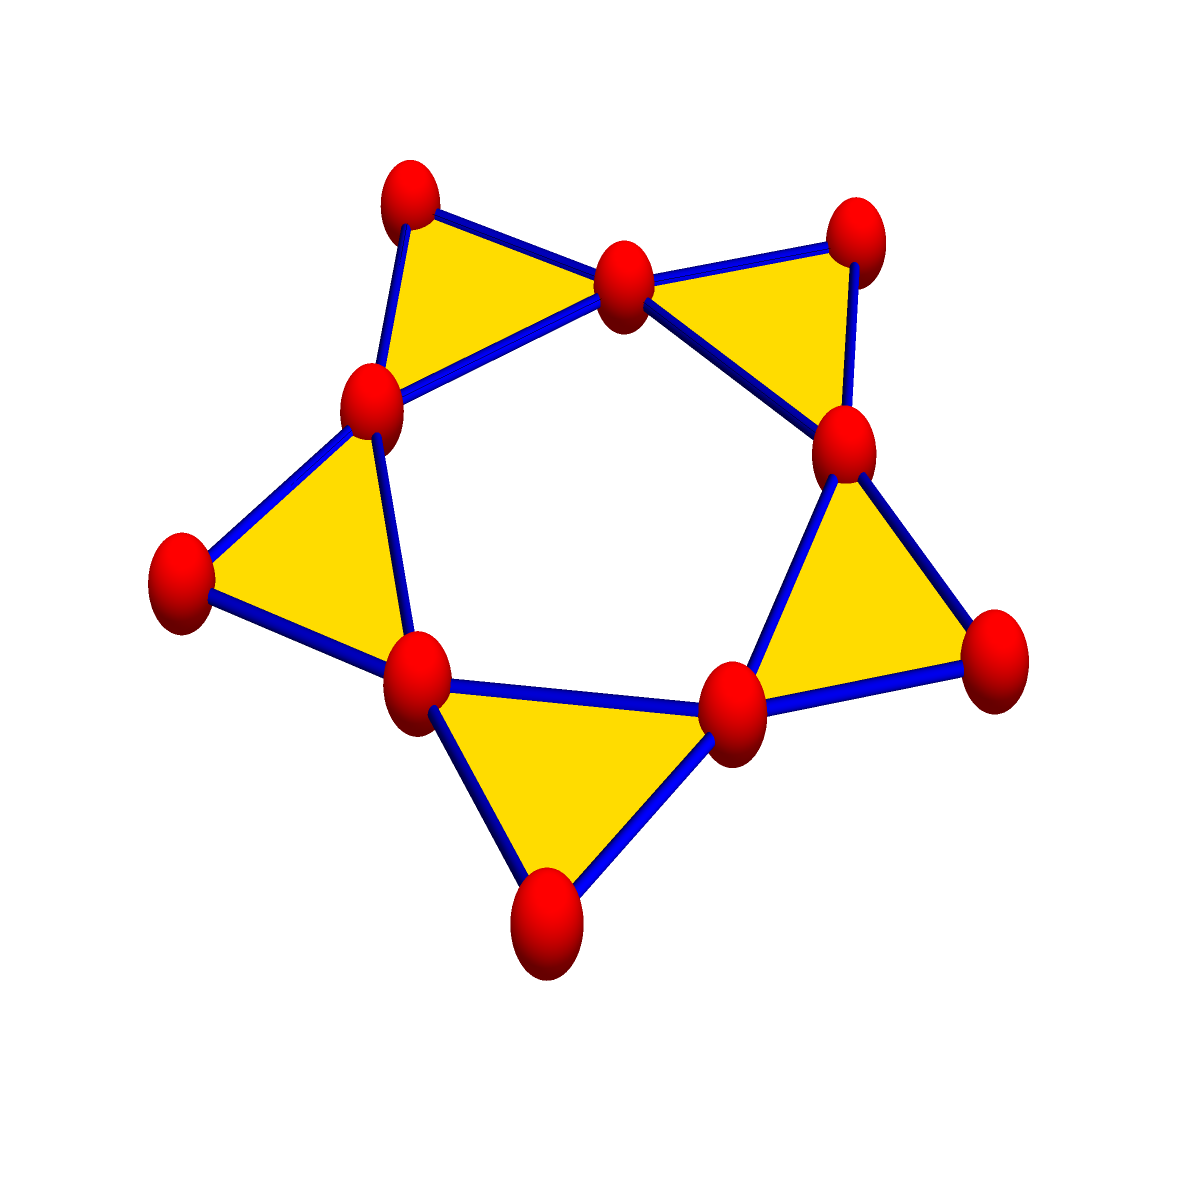 The connection graph to the cyclic graph with 5 vertices